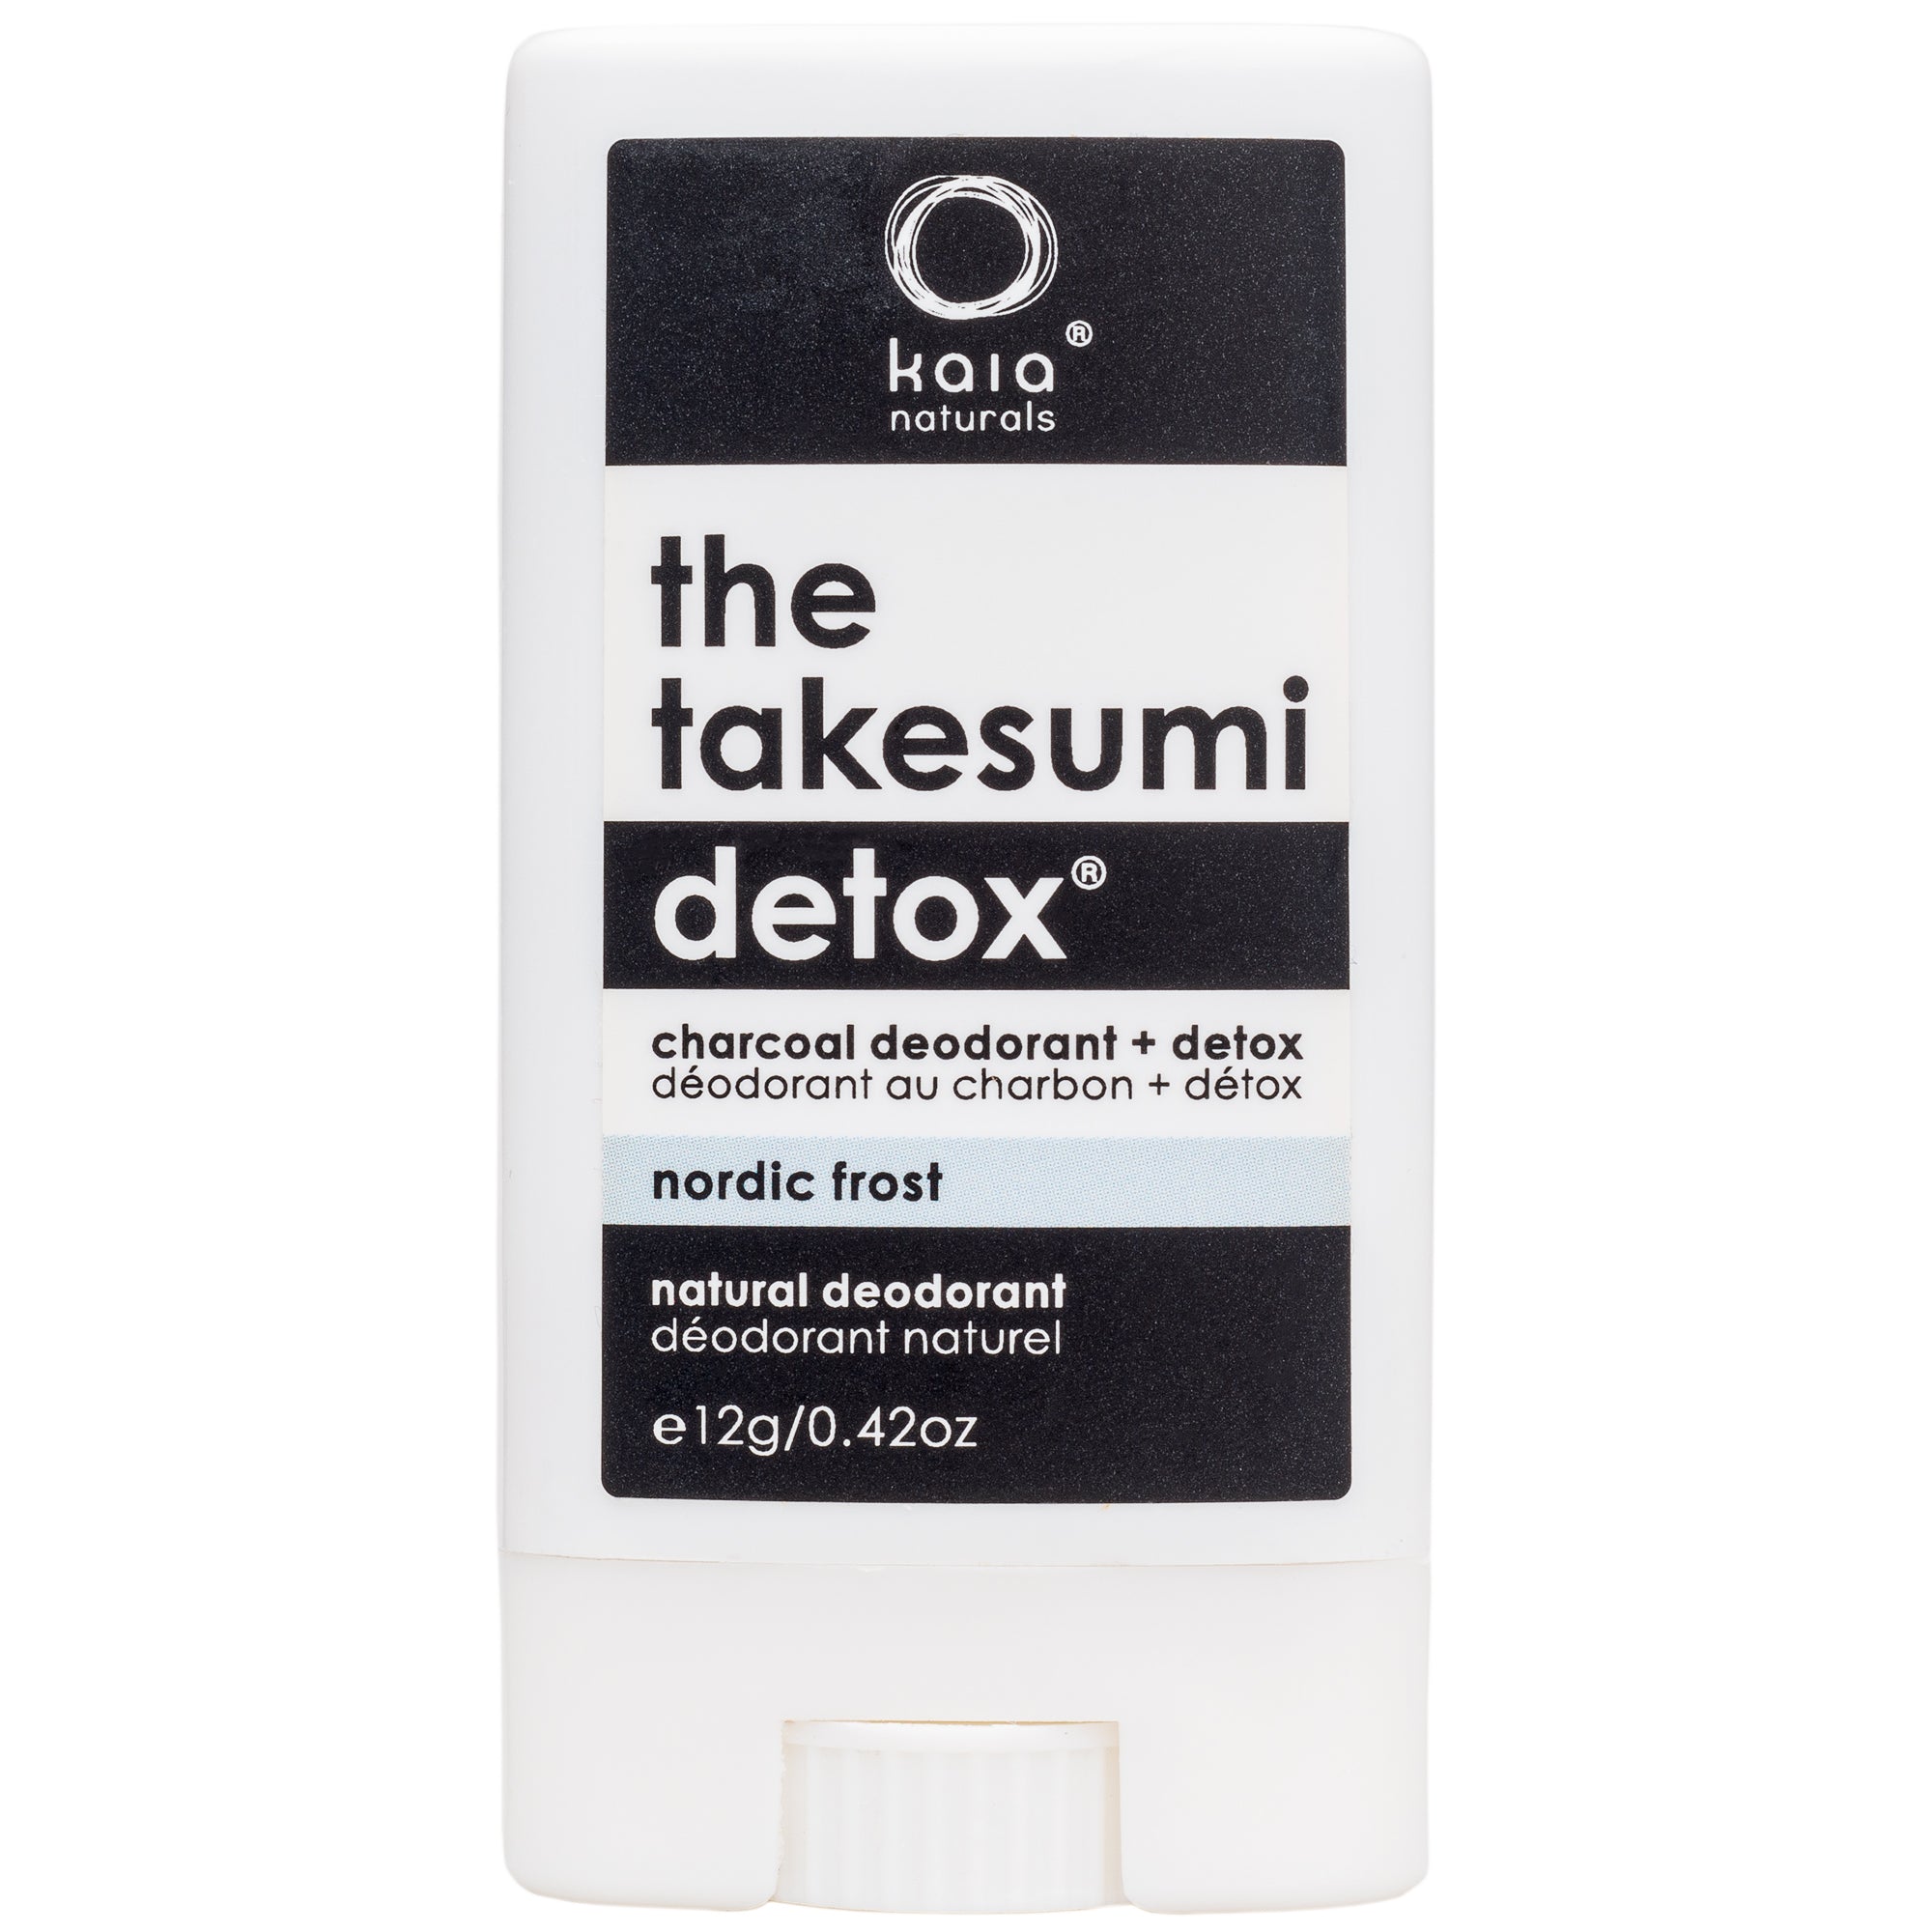 The Takesumi Detox Charcoal Deodorant and Detox Nordic Frost - Travel